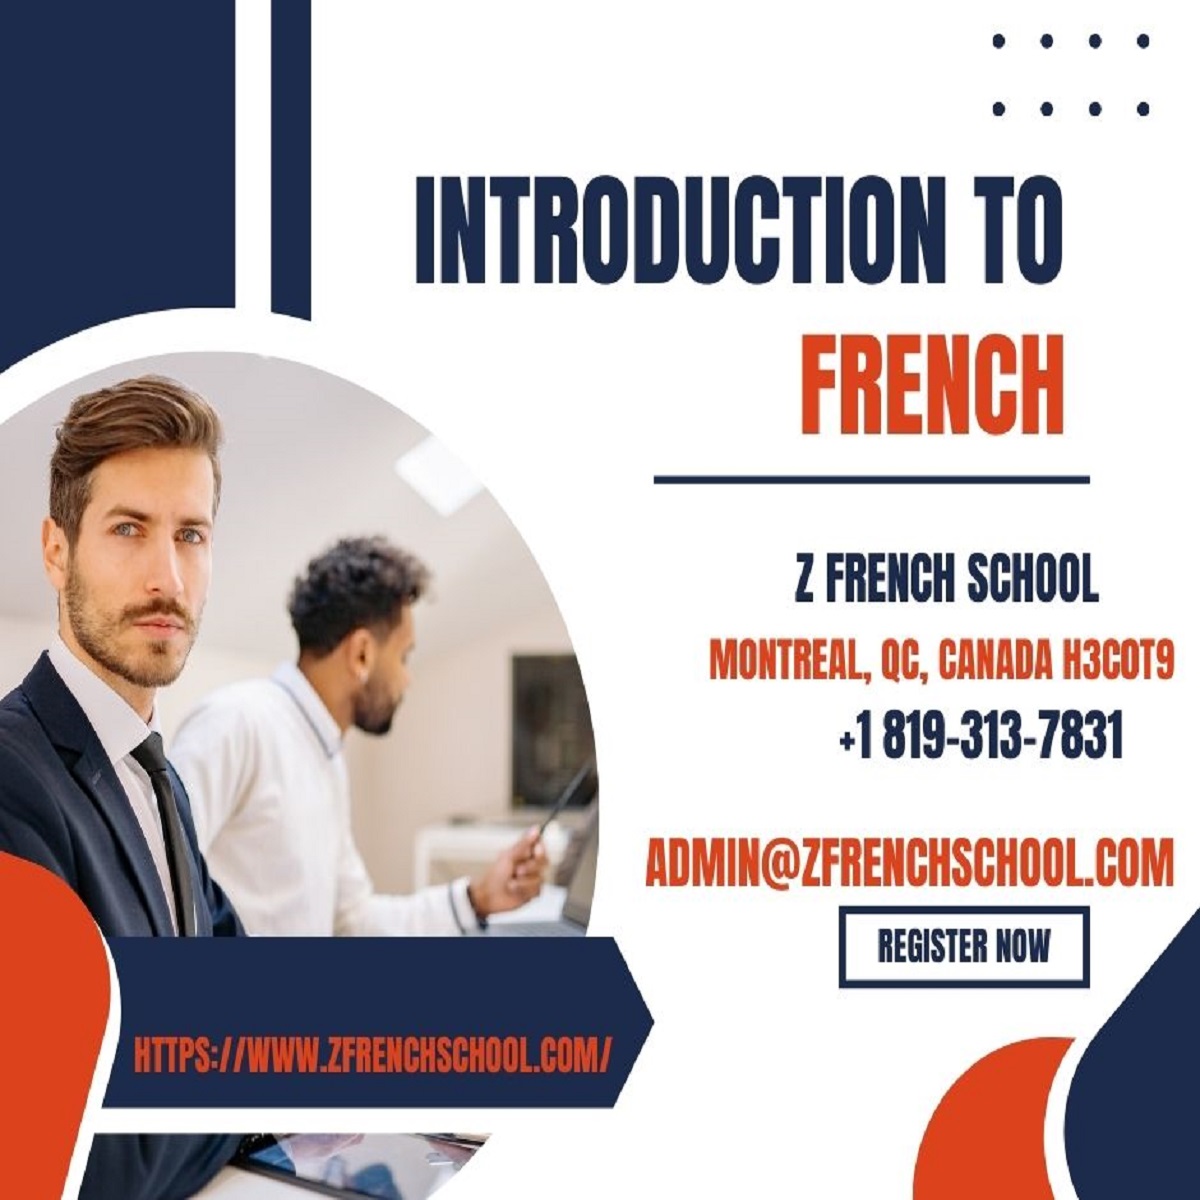 Introduction to French --ed4e0c0c